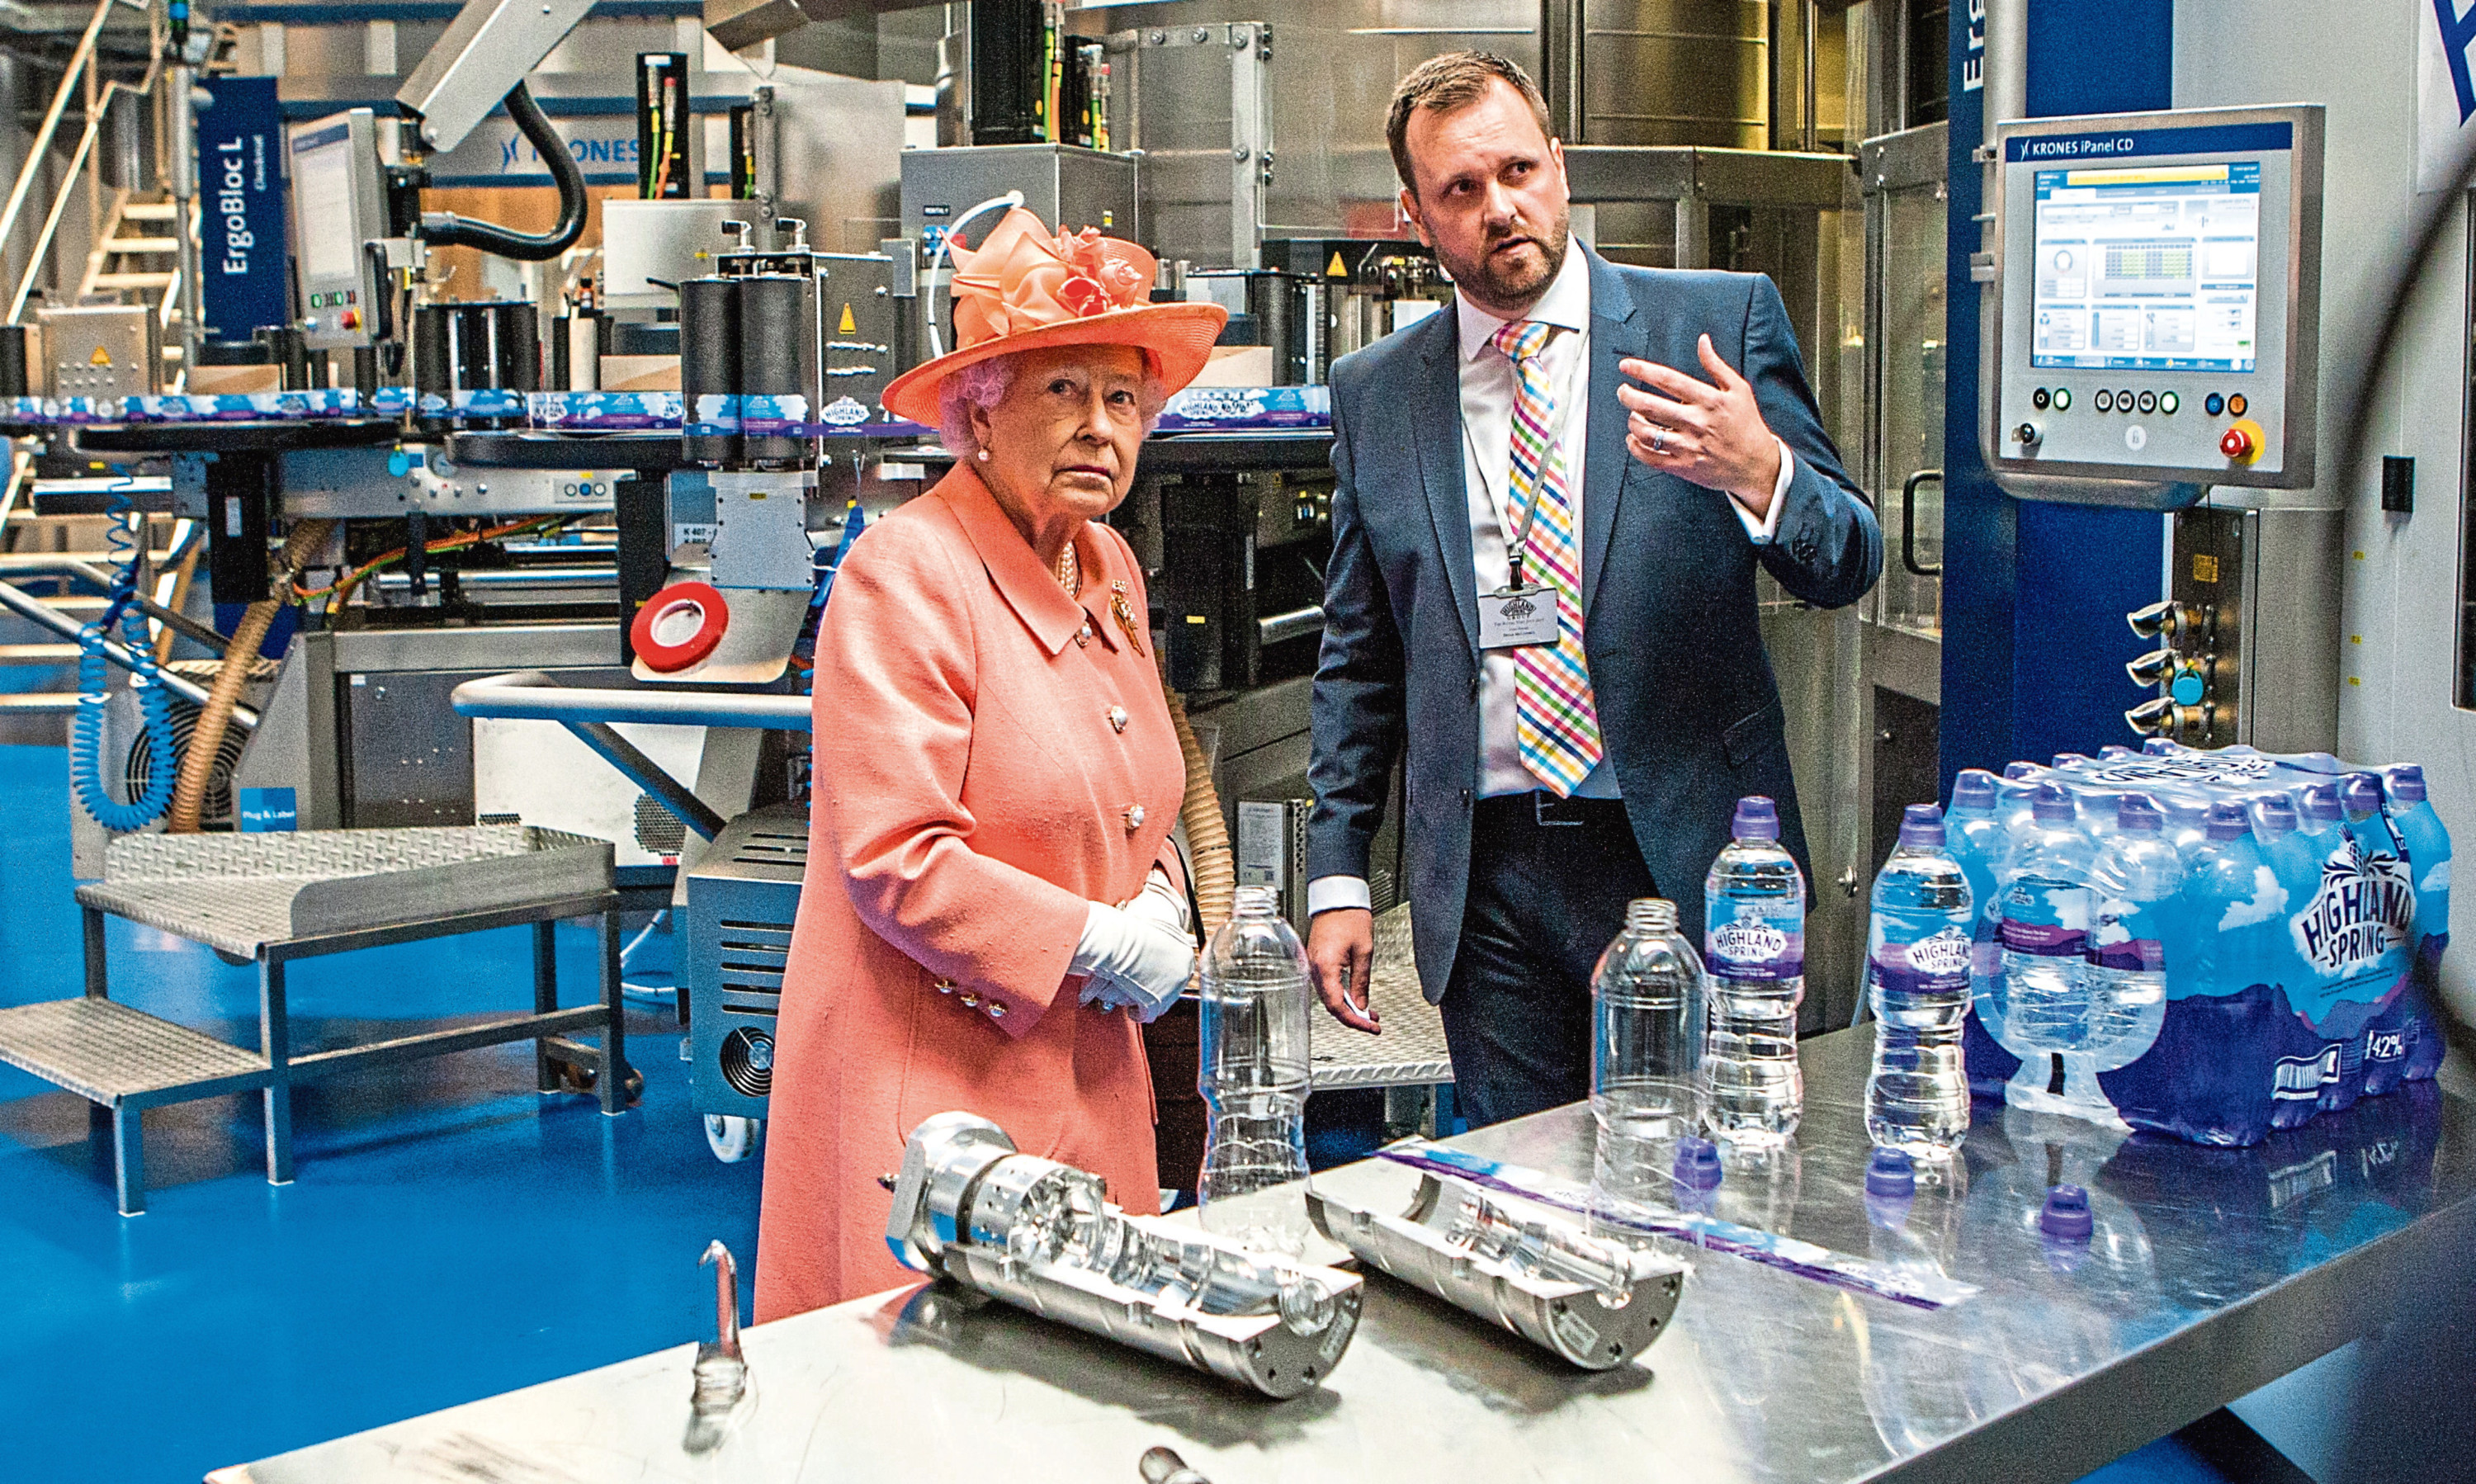 Courier News - Perth - Richard Burdge Story. The Queen visits Highland Spring factory, Blackford. Picture shows The Queen getting a demonstration from Bryan McCluskey (Group Operations Director). Highland Spring, Stirling Street, Blackford. Thursday 6th July 2017.